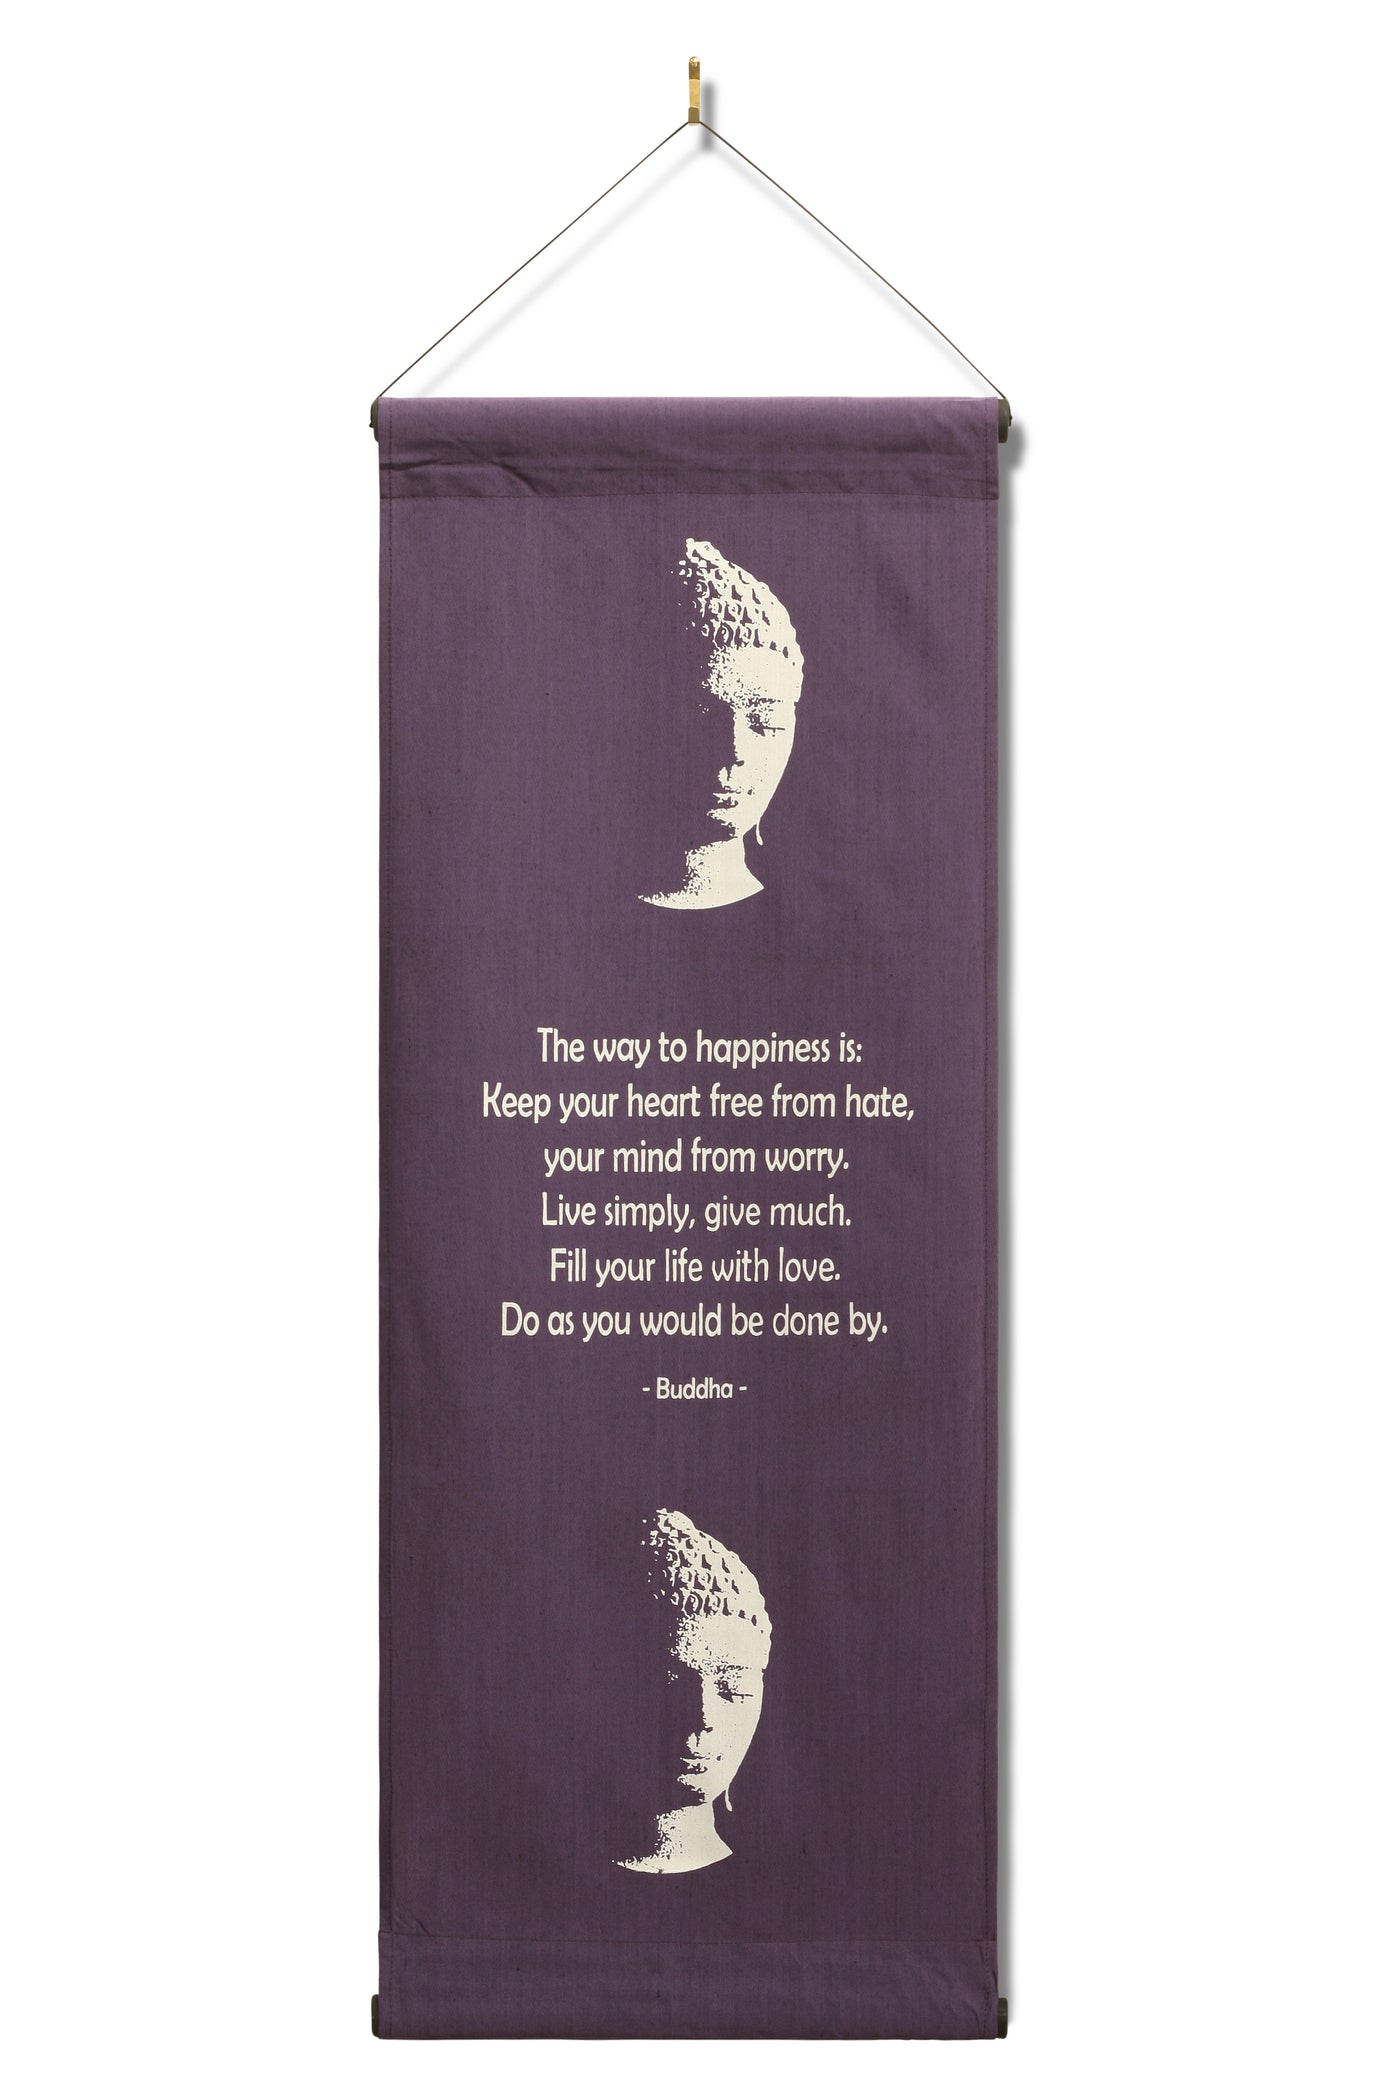 Inspirational Wall Hanging Scroll "Buddha - The Way To Happiness" Banner, Inspiring Quote, Affirmation Motivational Uplifting, Thought Saying Tapestry